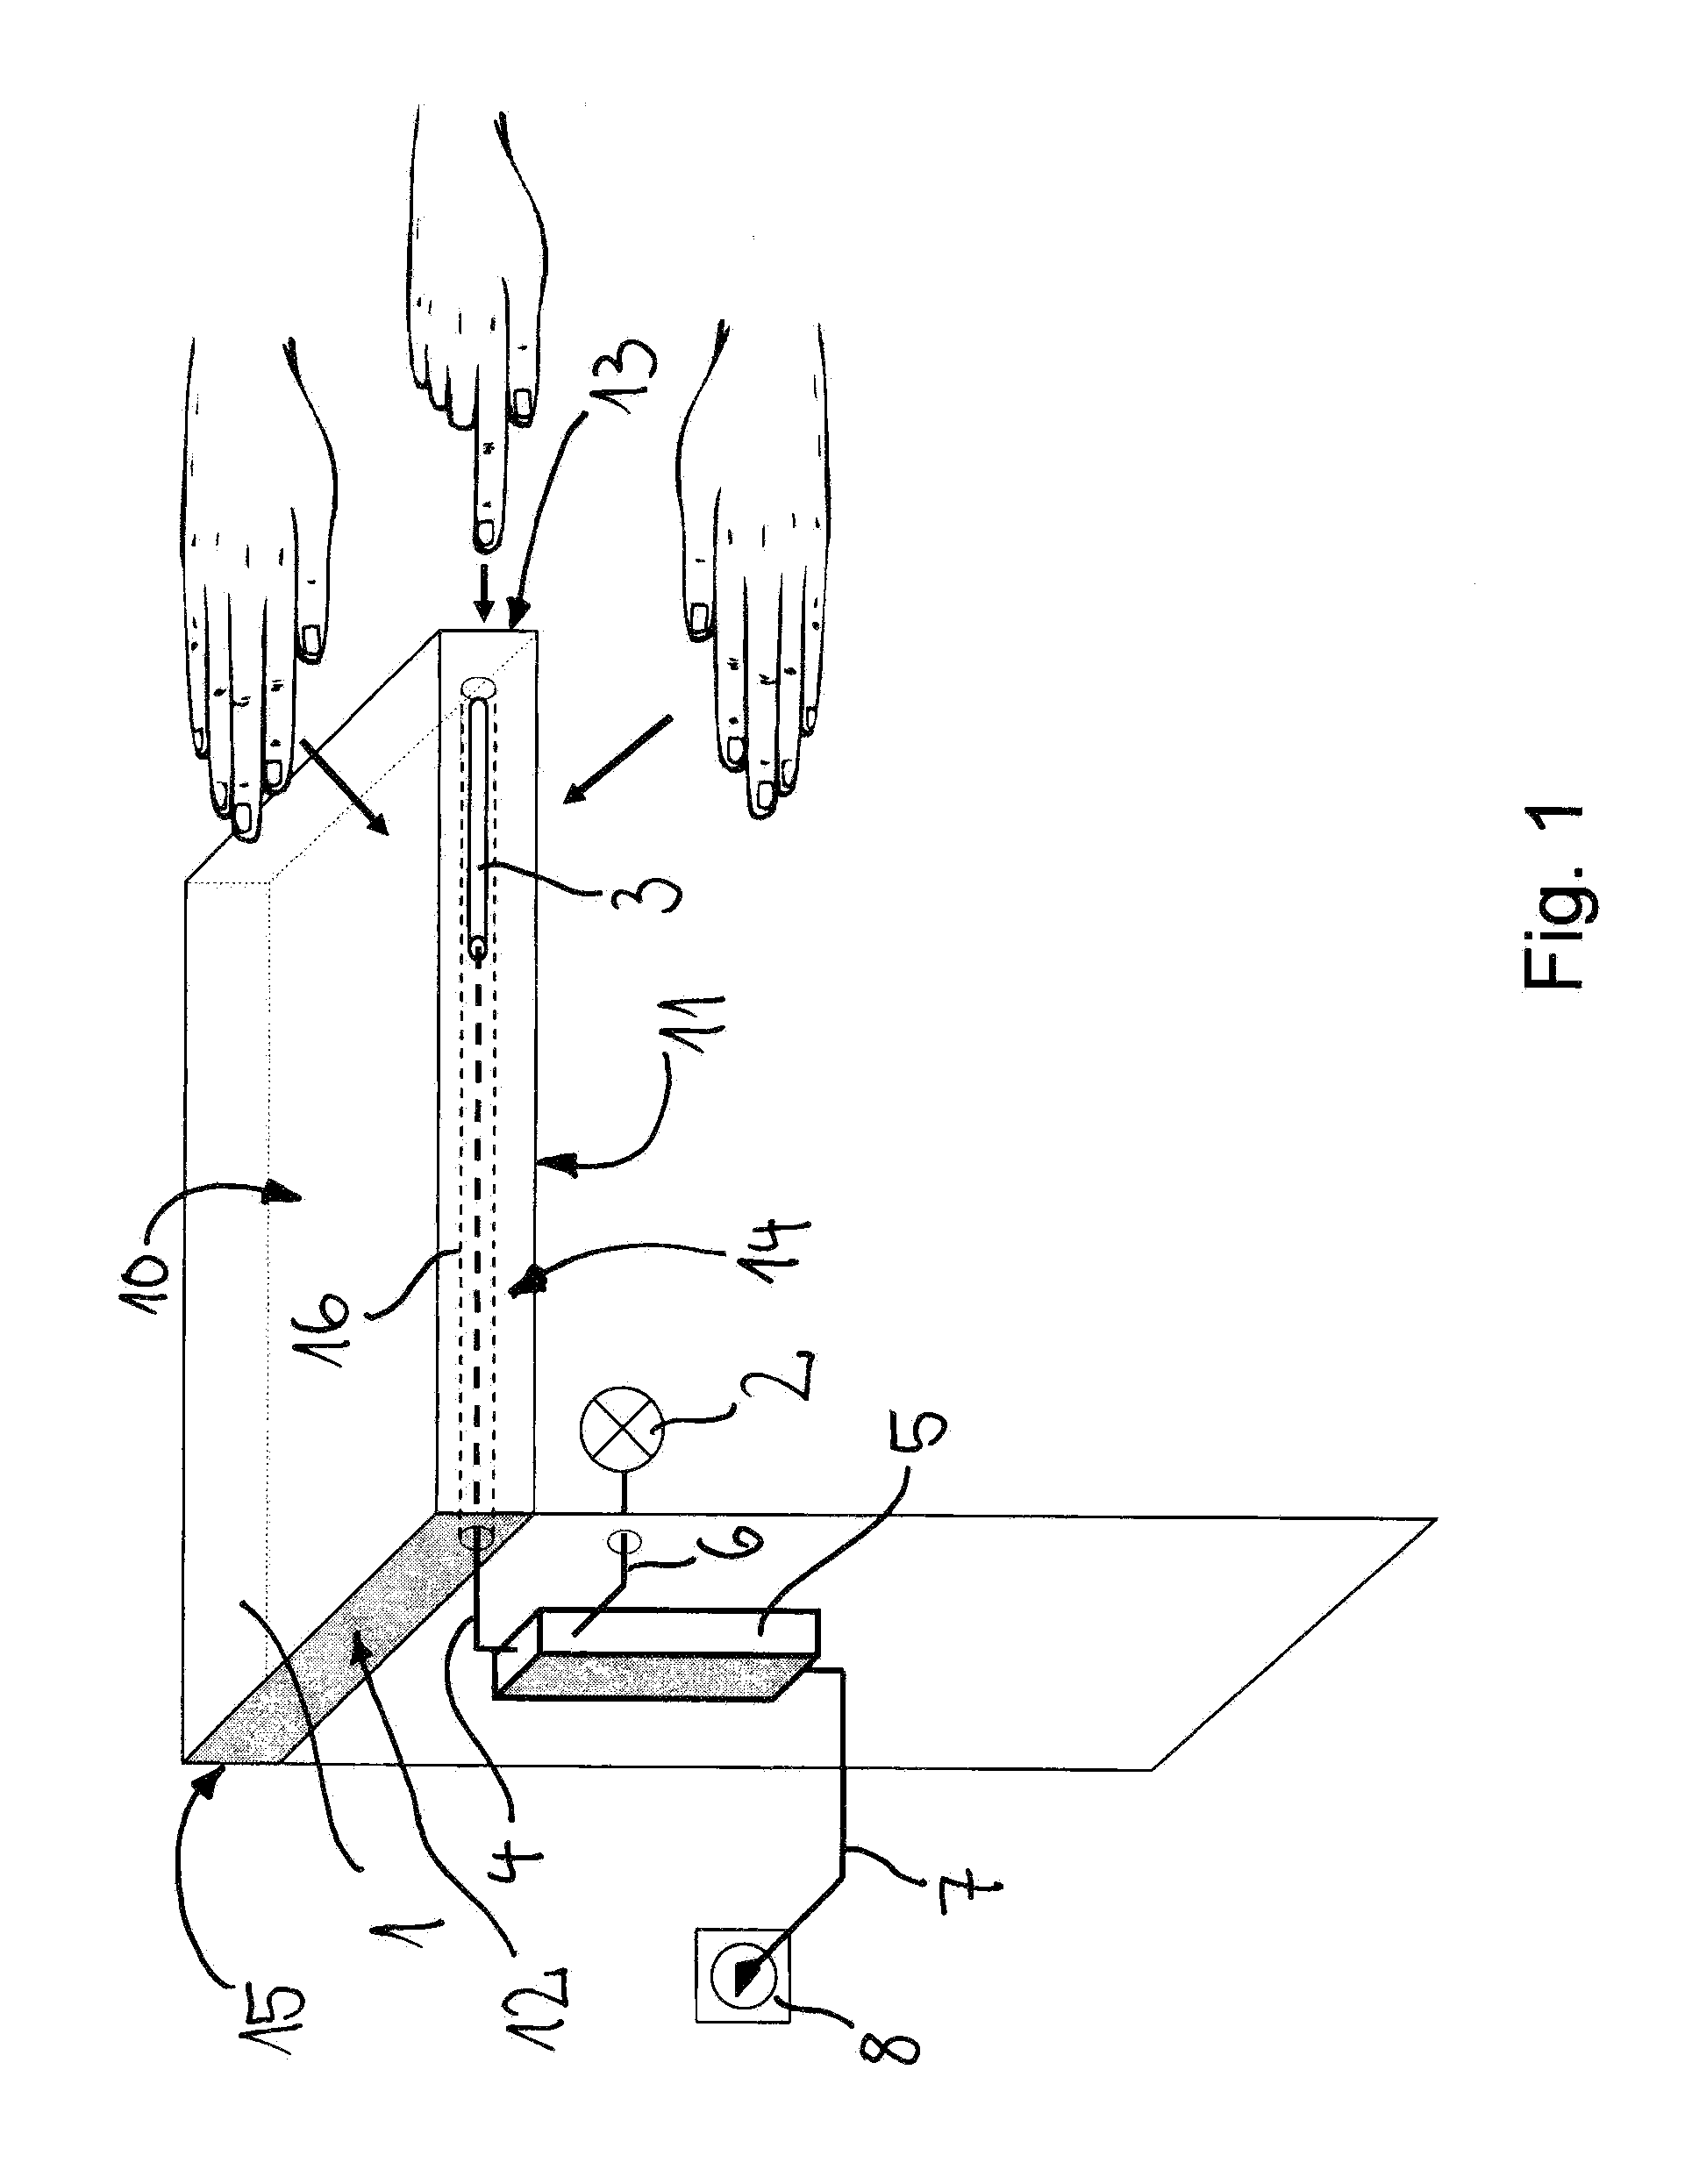 Connecting arrangement between a tooth prosthesis and an implant post